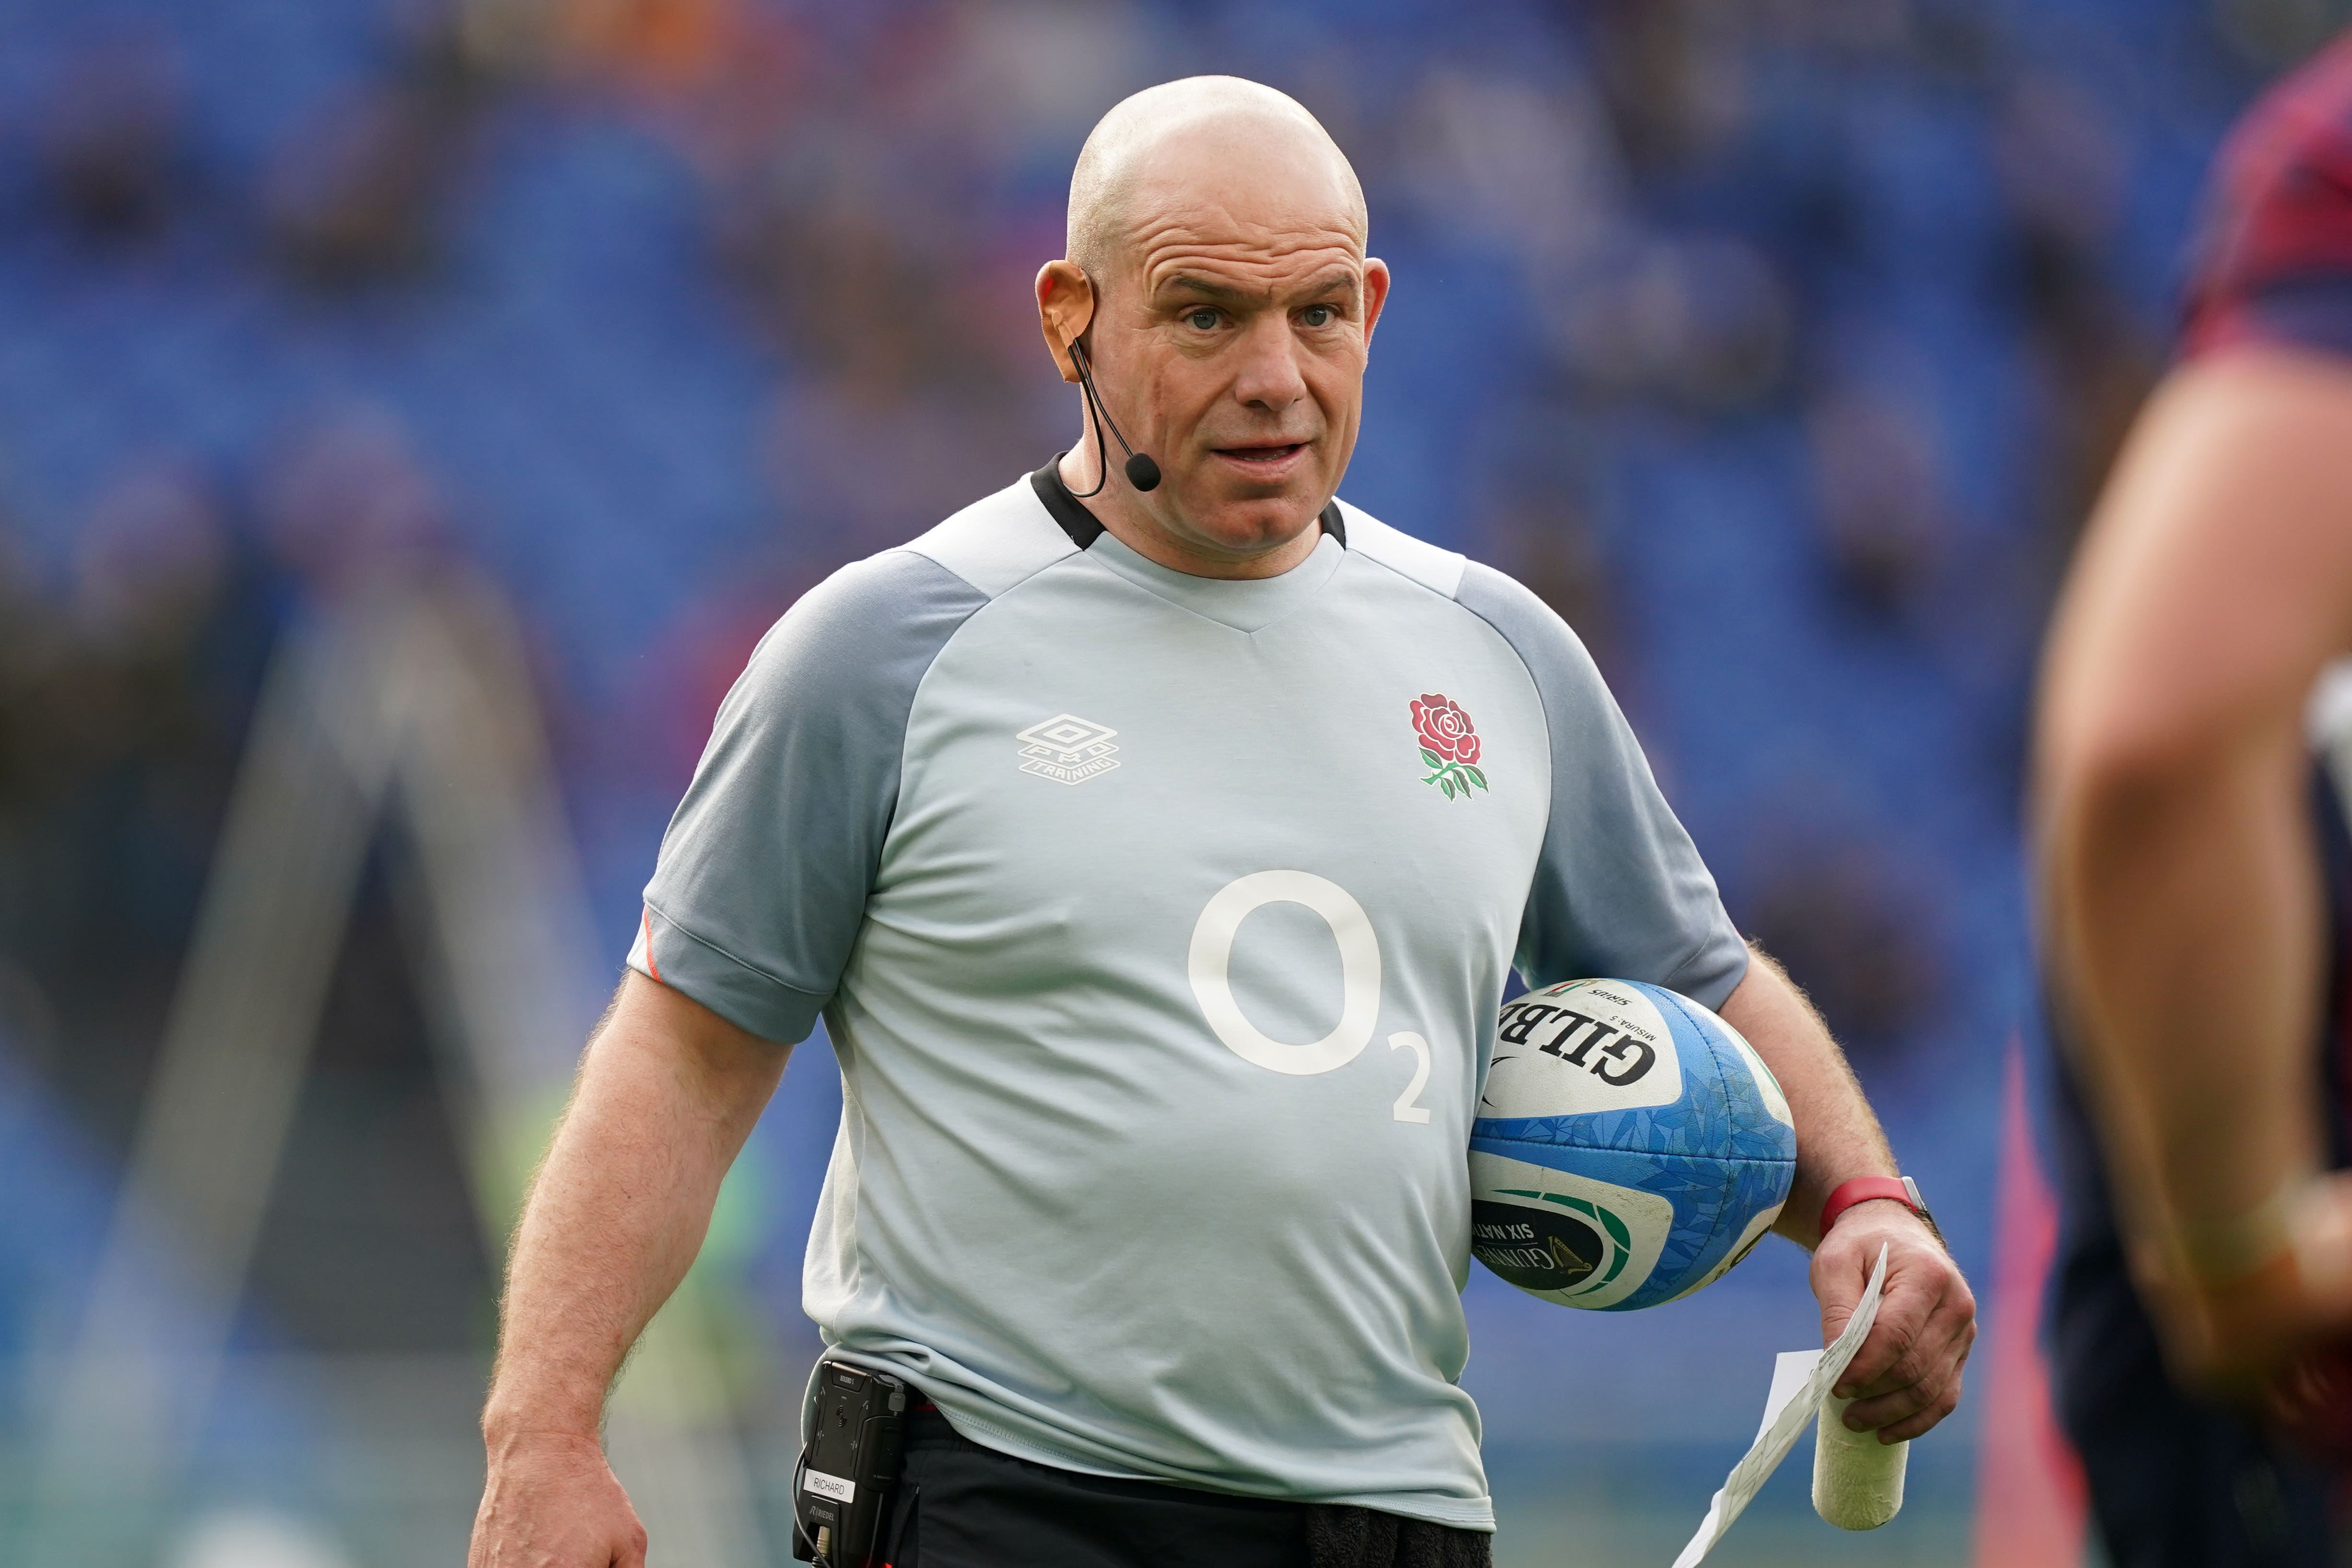 England forwards coach Richard Cockerill expects South Africa to be tough opponents (Mike Egerton/PA)